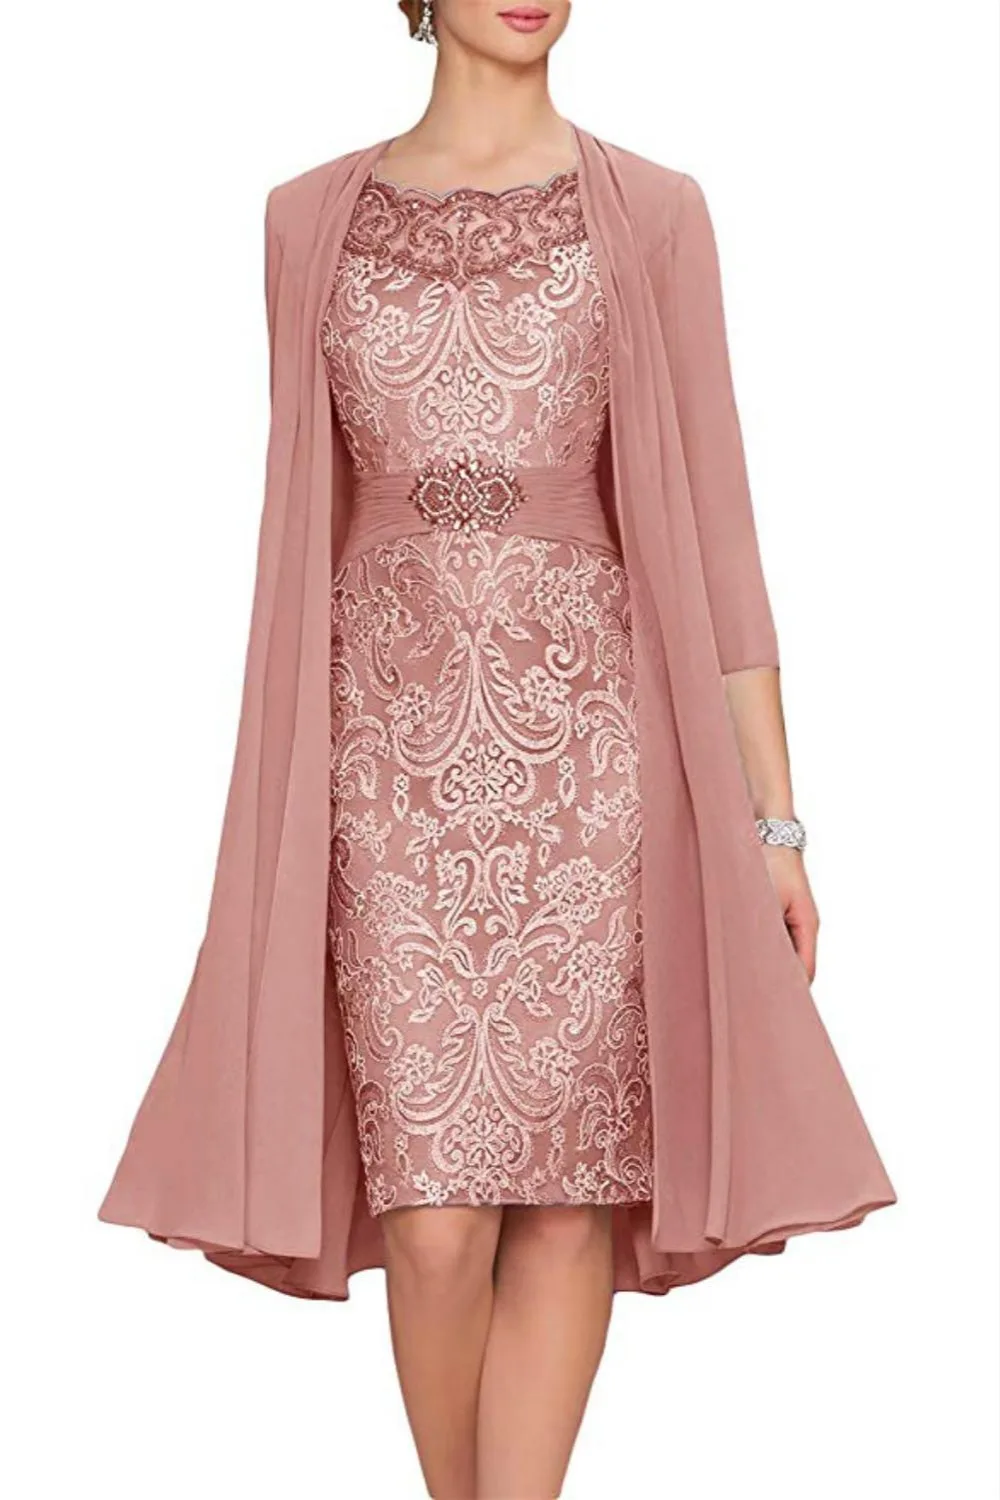 

Charming Two Pieces Sheath Lace vestido novia Formal Wear groom Wedding Guest gown Evening Mother Of Bride Dresses With Jacket